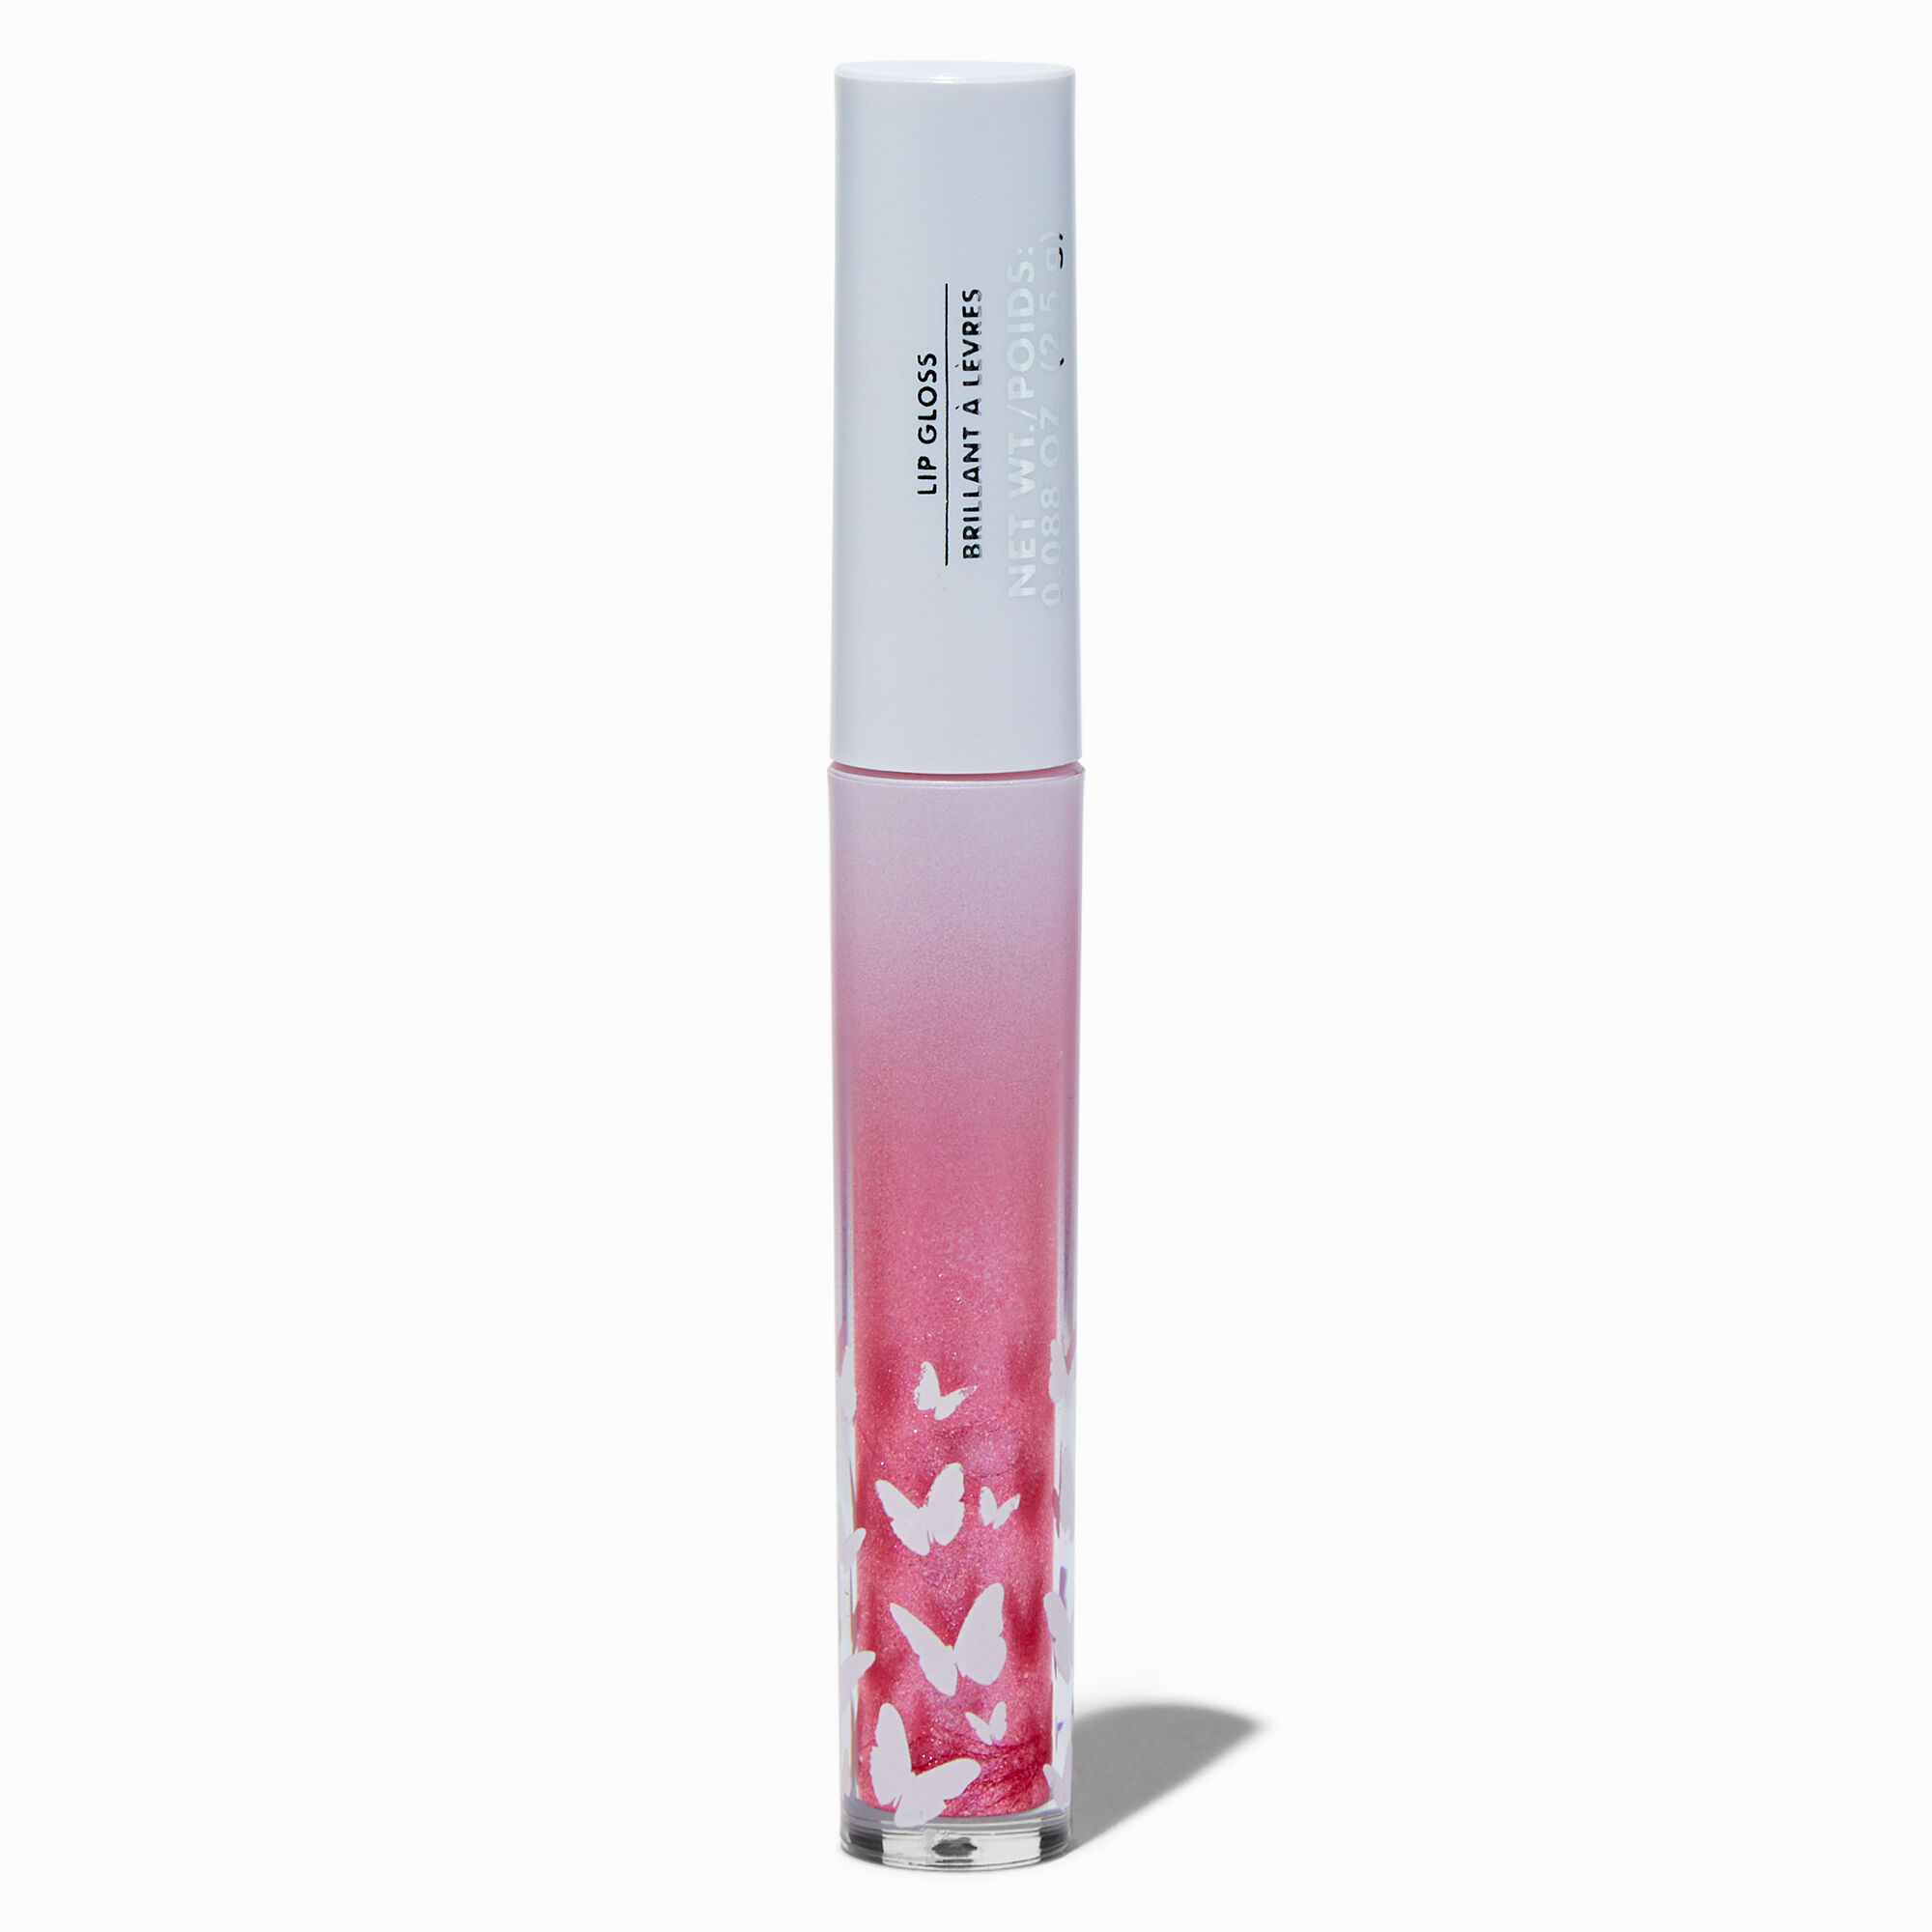 View Claires Blush Shimmer Butterfly Lip Gloss Wand information